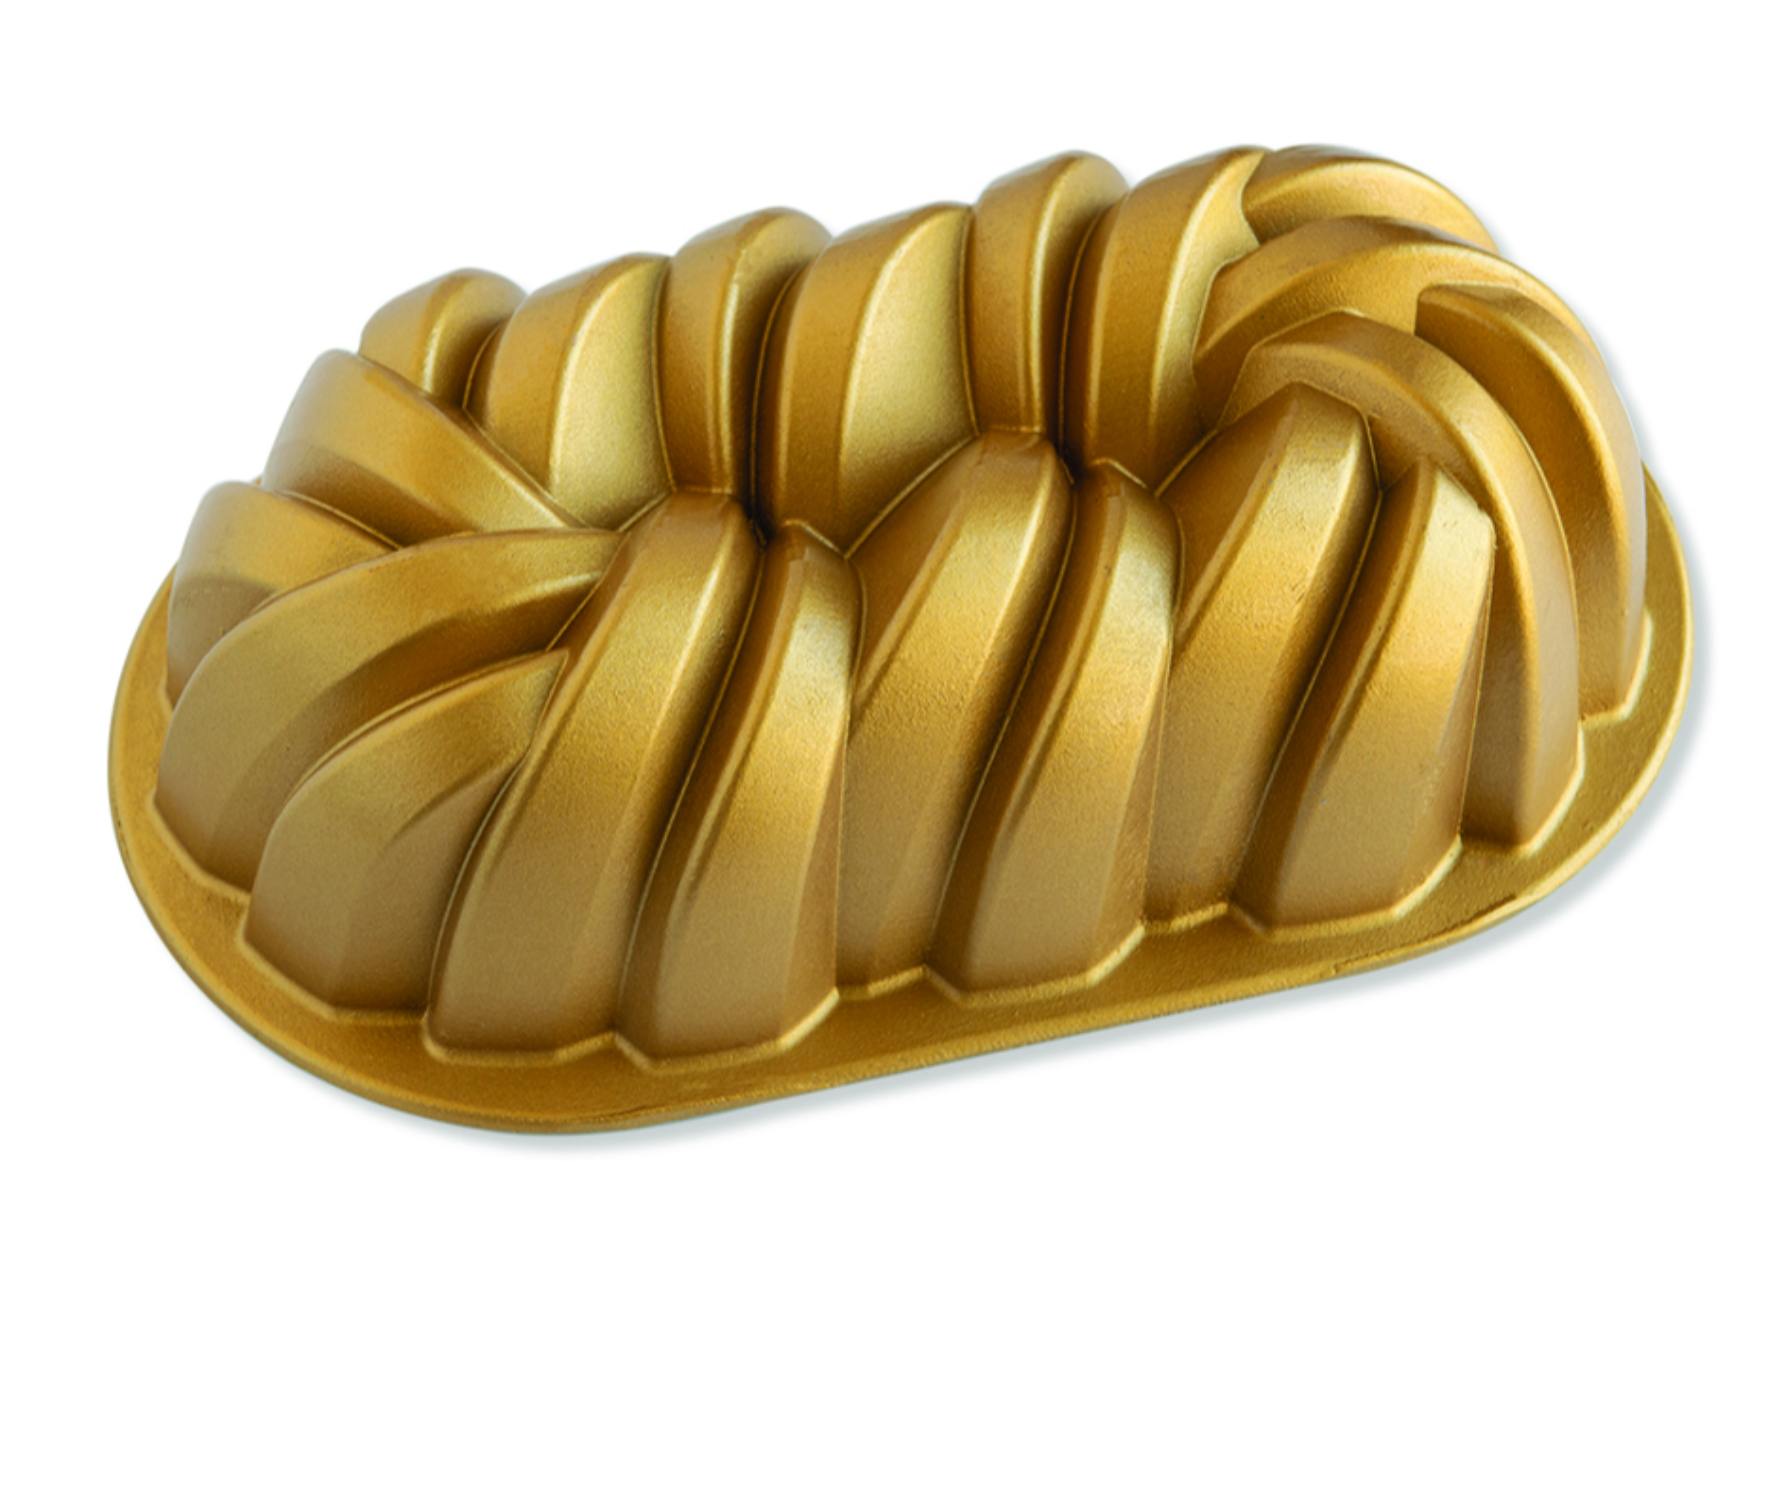 Nordic Ware 75Th Anniversary Braided Loaf Pan